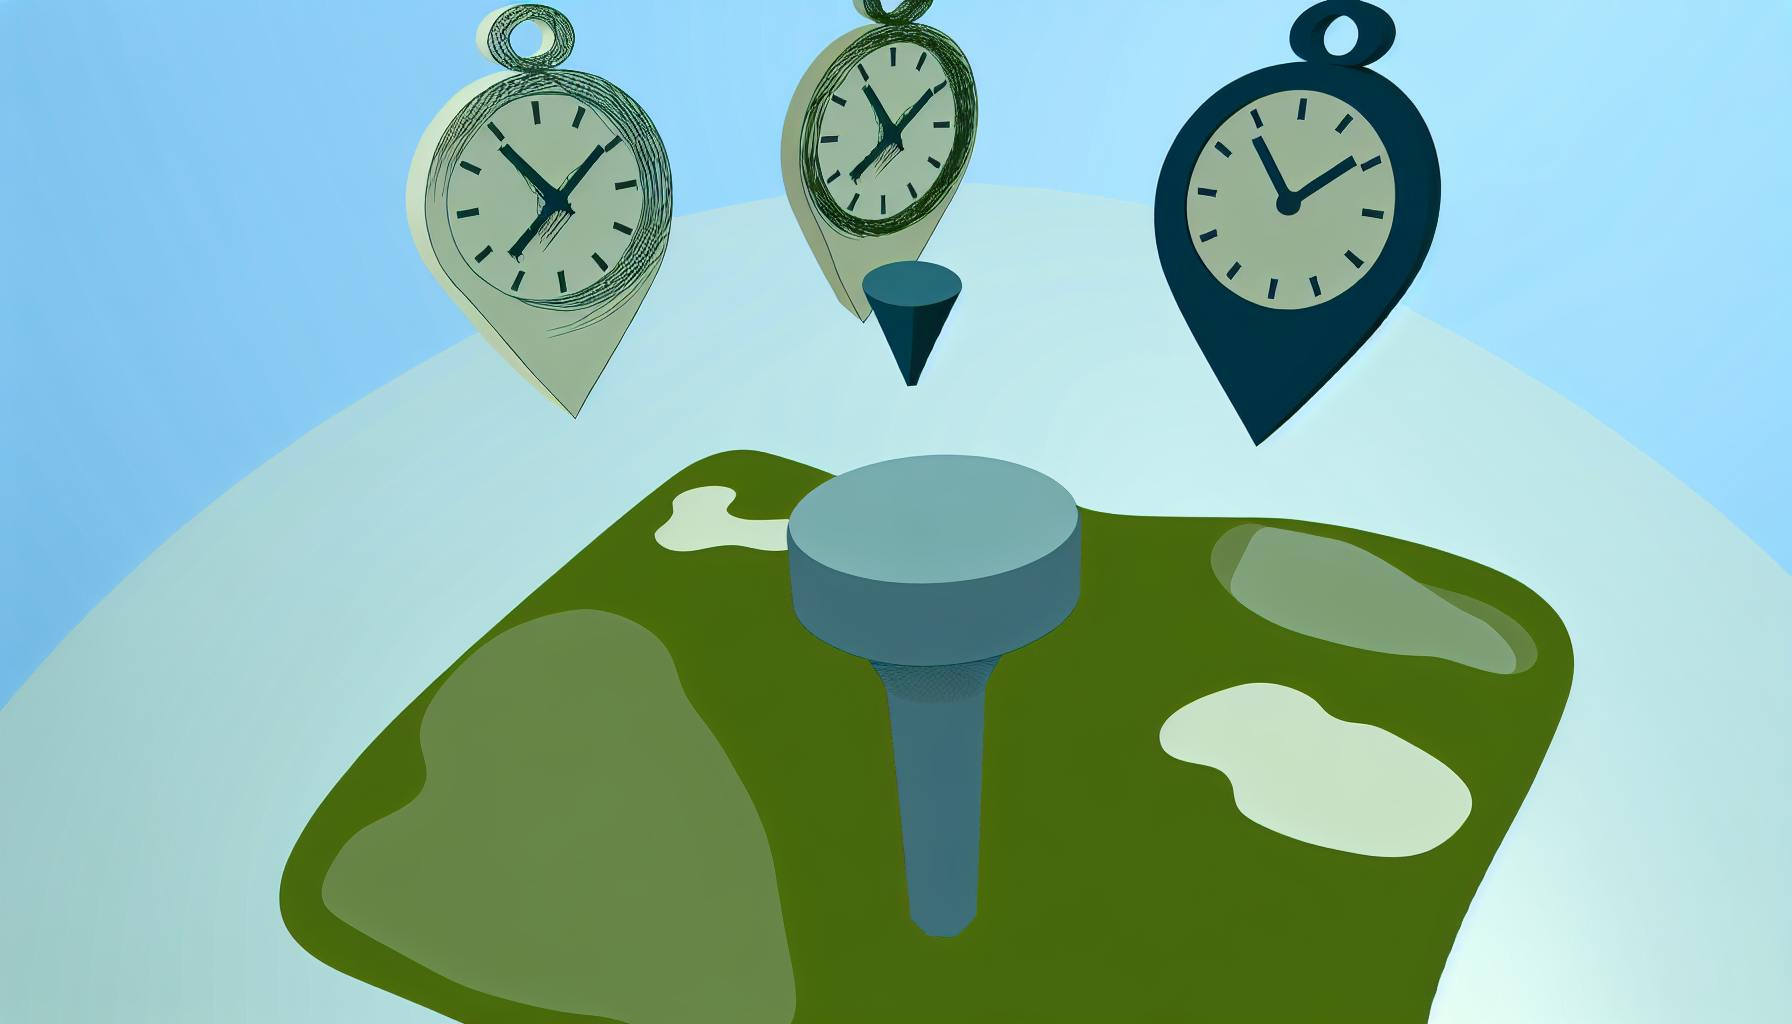 Tee times around me: How to find the best options